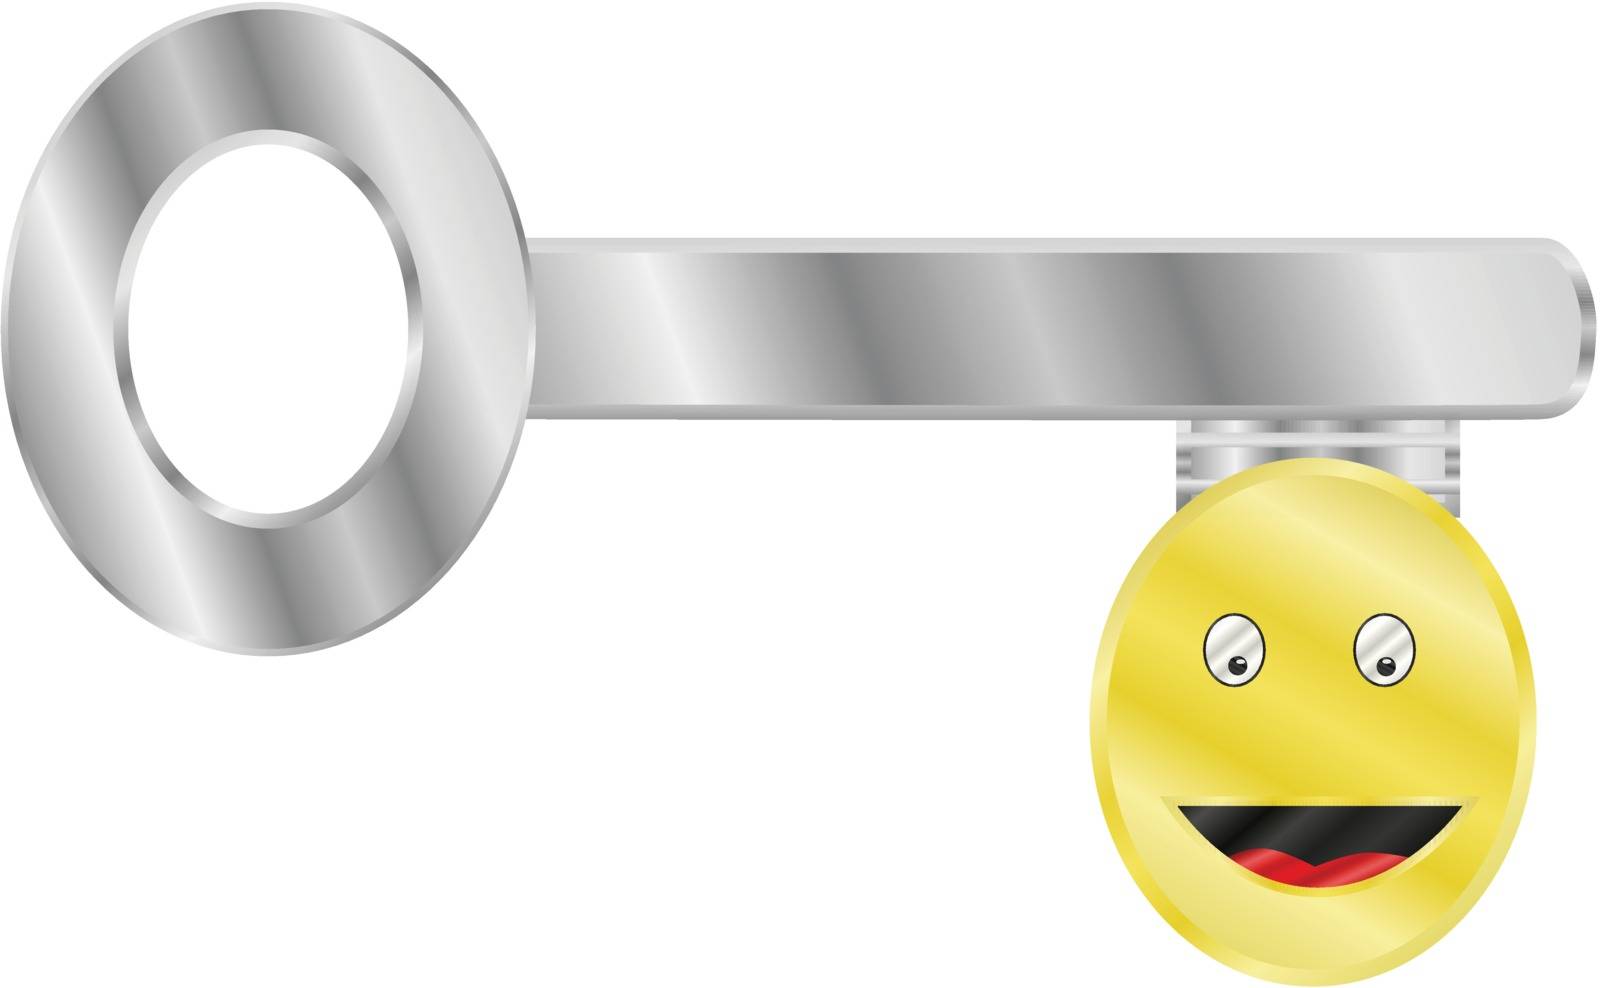 Concept illustration of a key with a happy face: the key to happiness